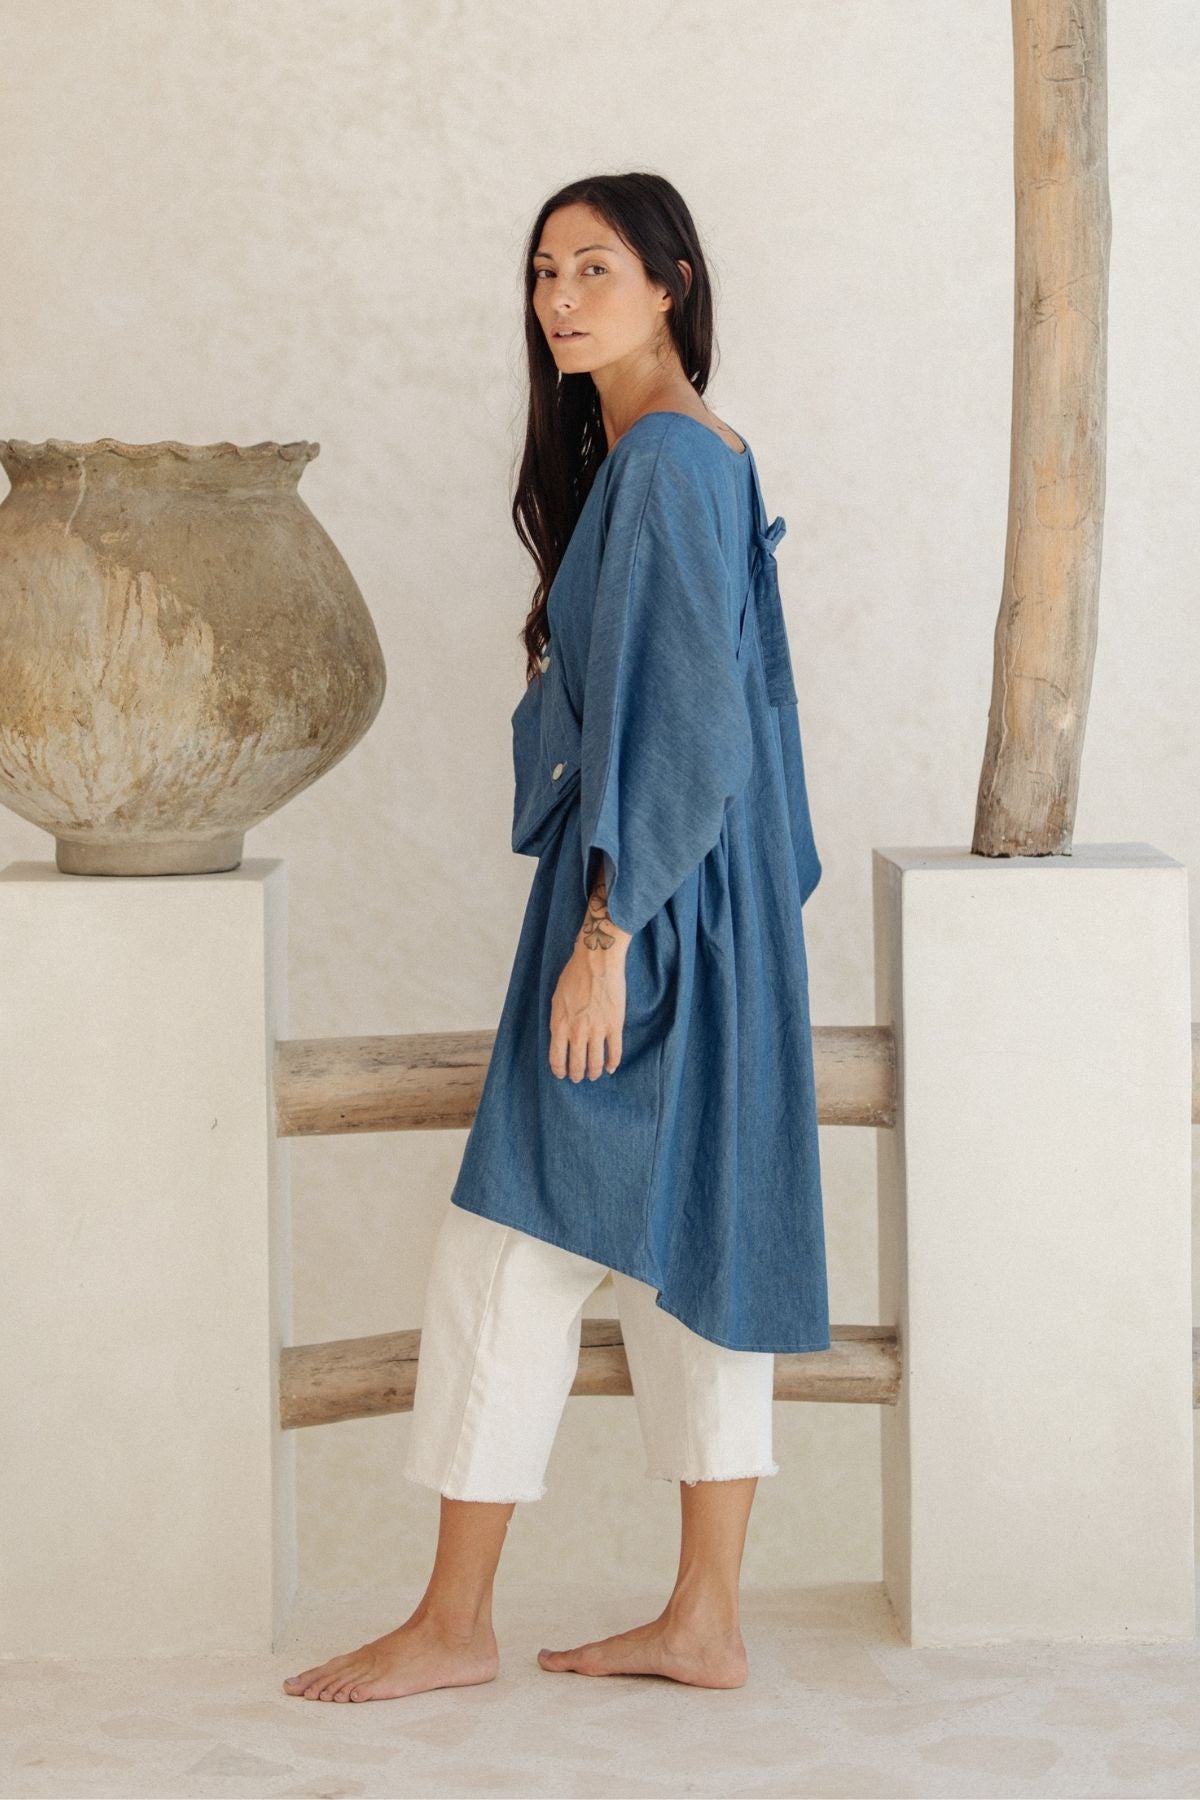 Stonewashed Denim Butterfly Tunic with Hip Satchel